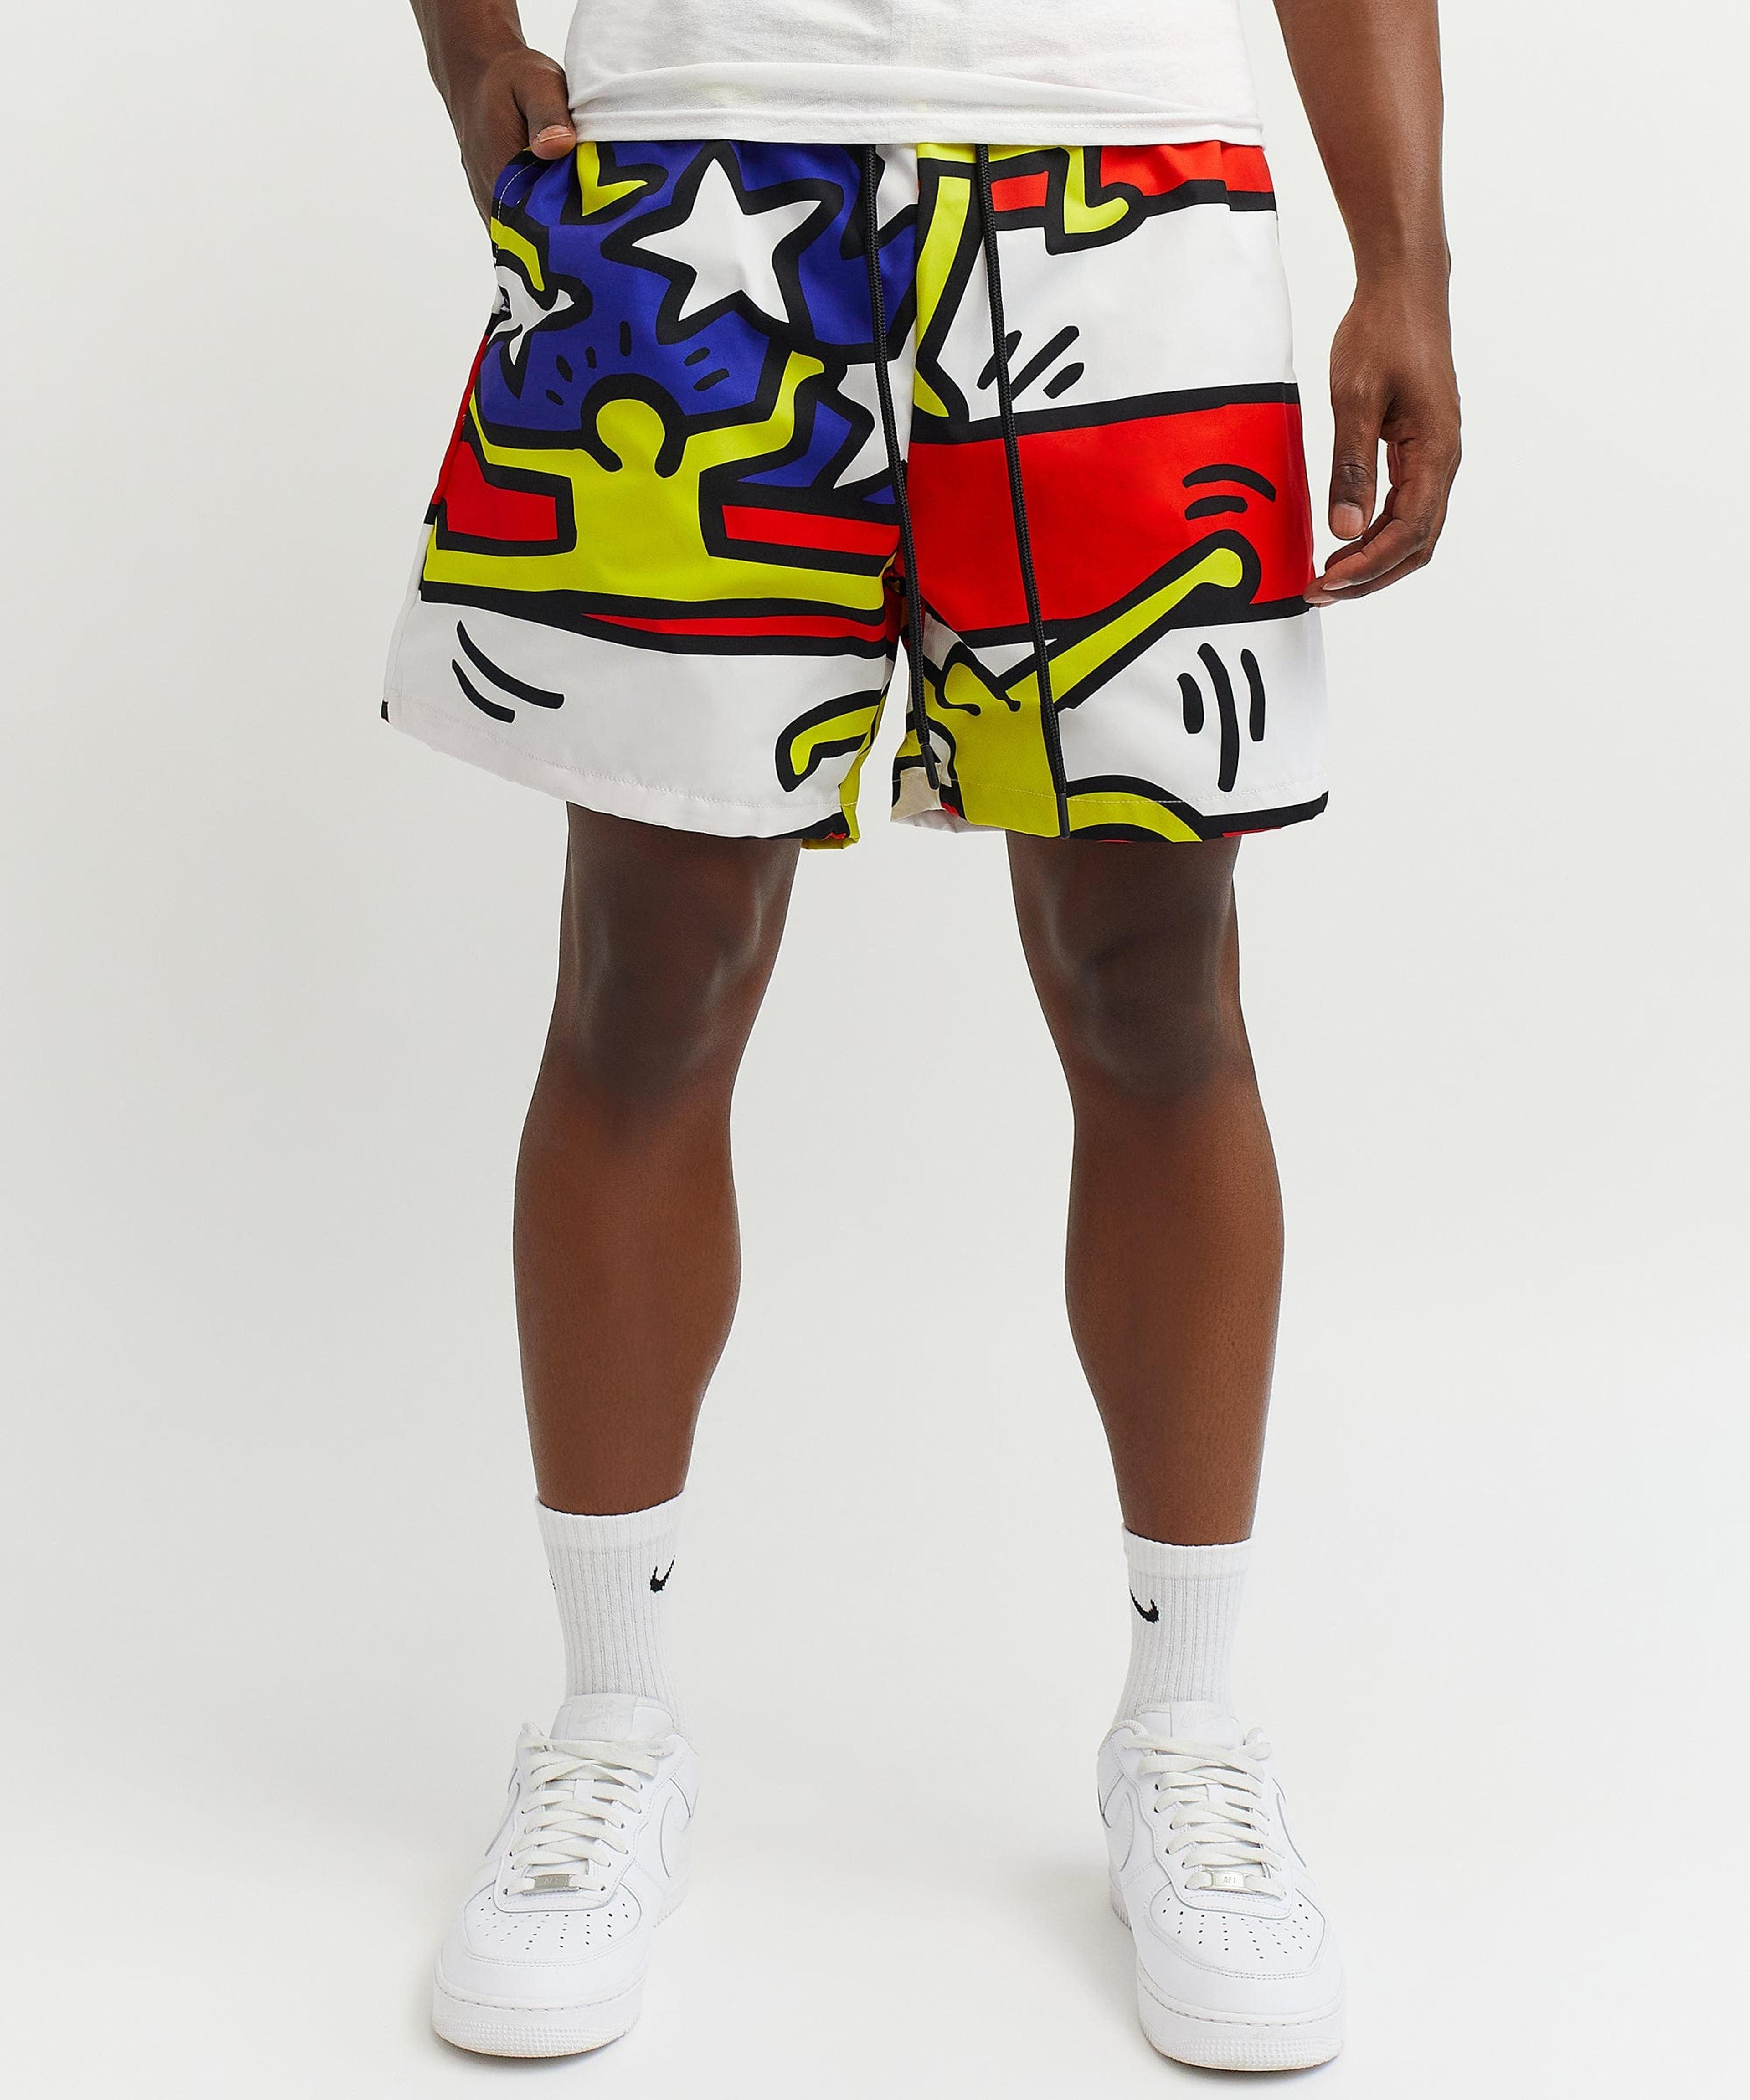 Alternate View 2 of Keith Haring American Flag Shorts